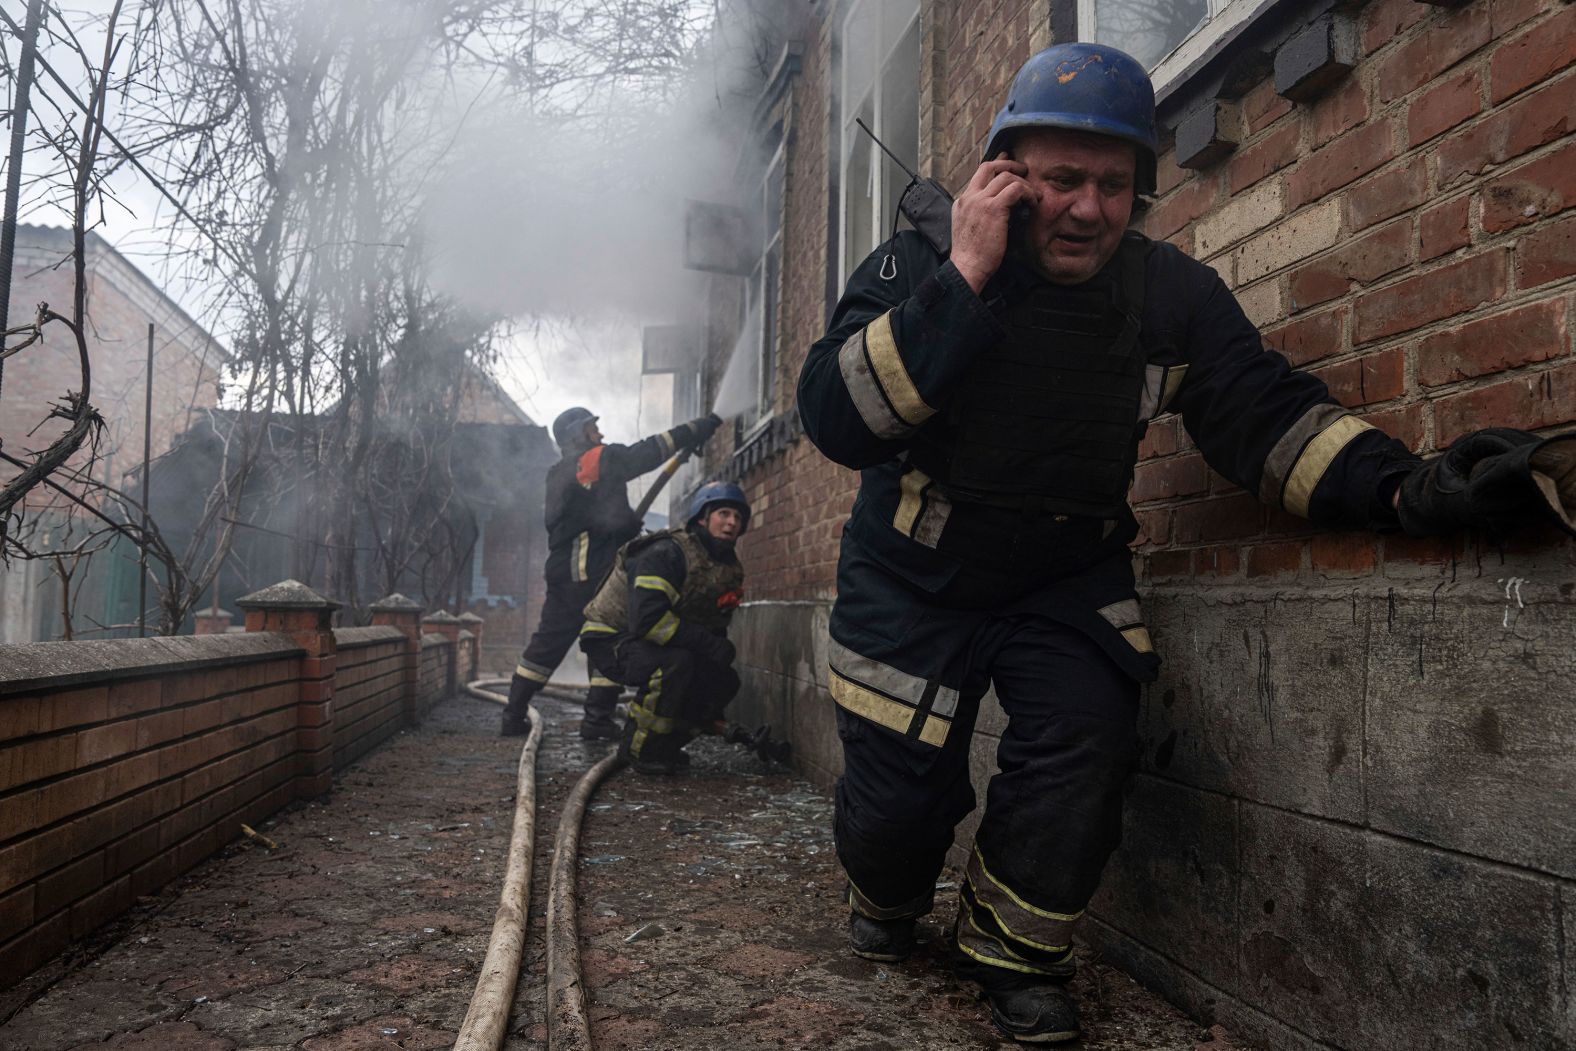 A rescue worker speaks on the phone while other members of his team put out a house fire caused by Russian shelling in Kostiantynivka, Ukraine, on Friday, March 10.